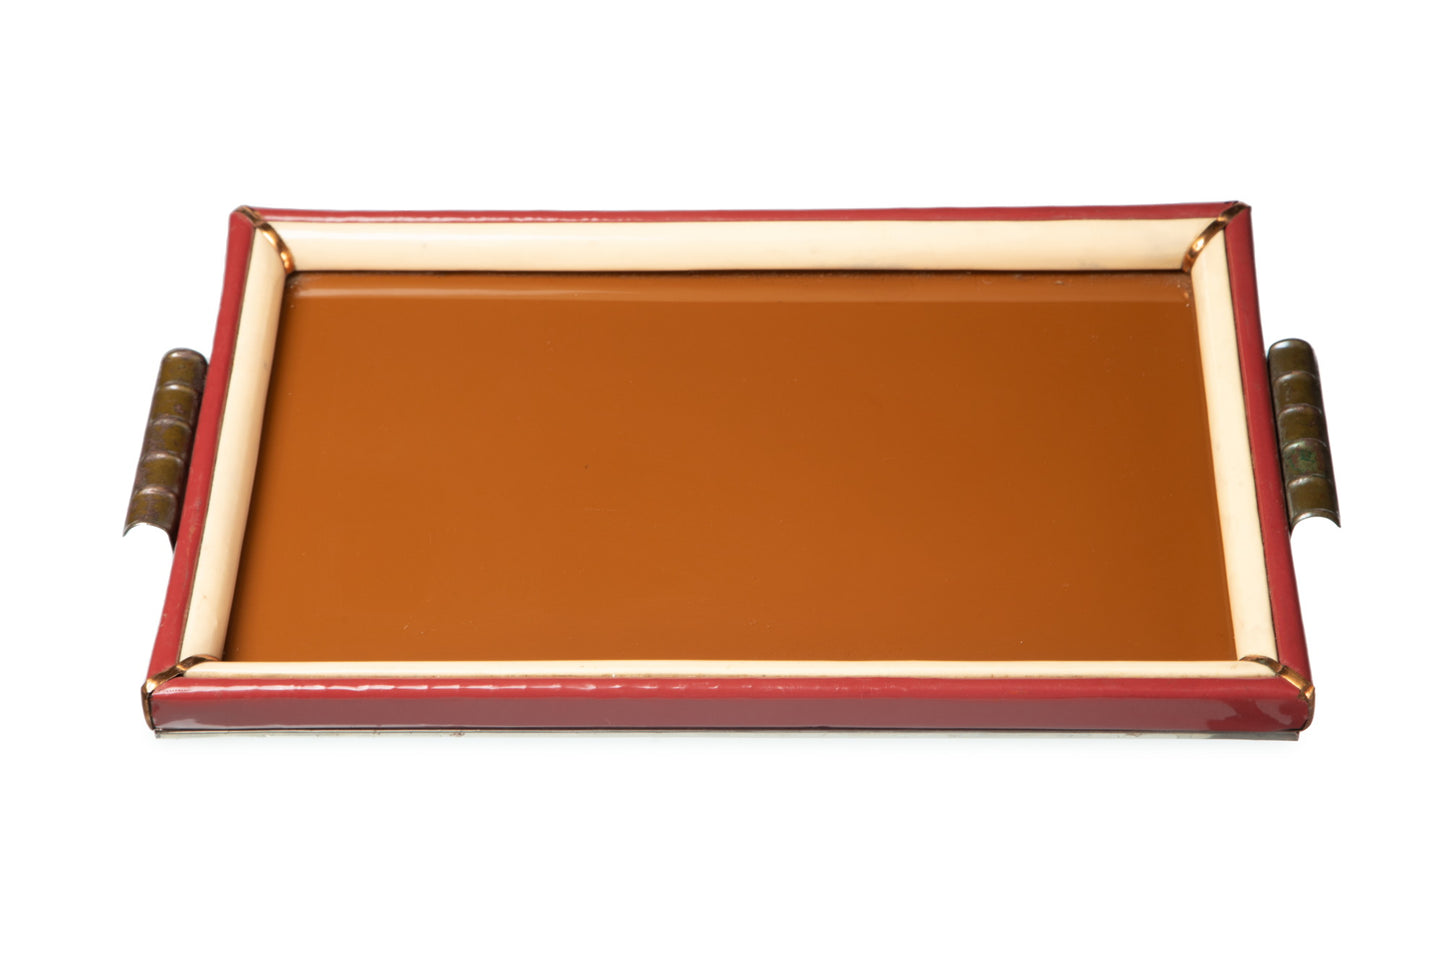 Ivory and red lacquered tray from the 70s